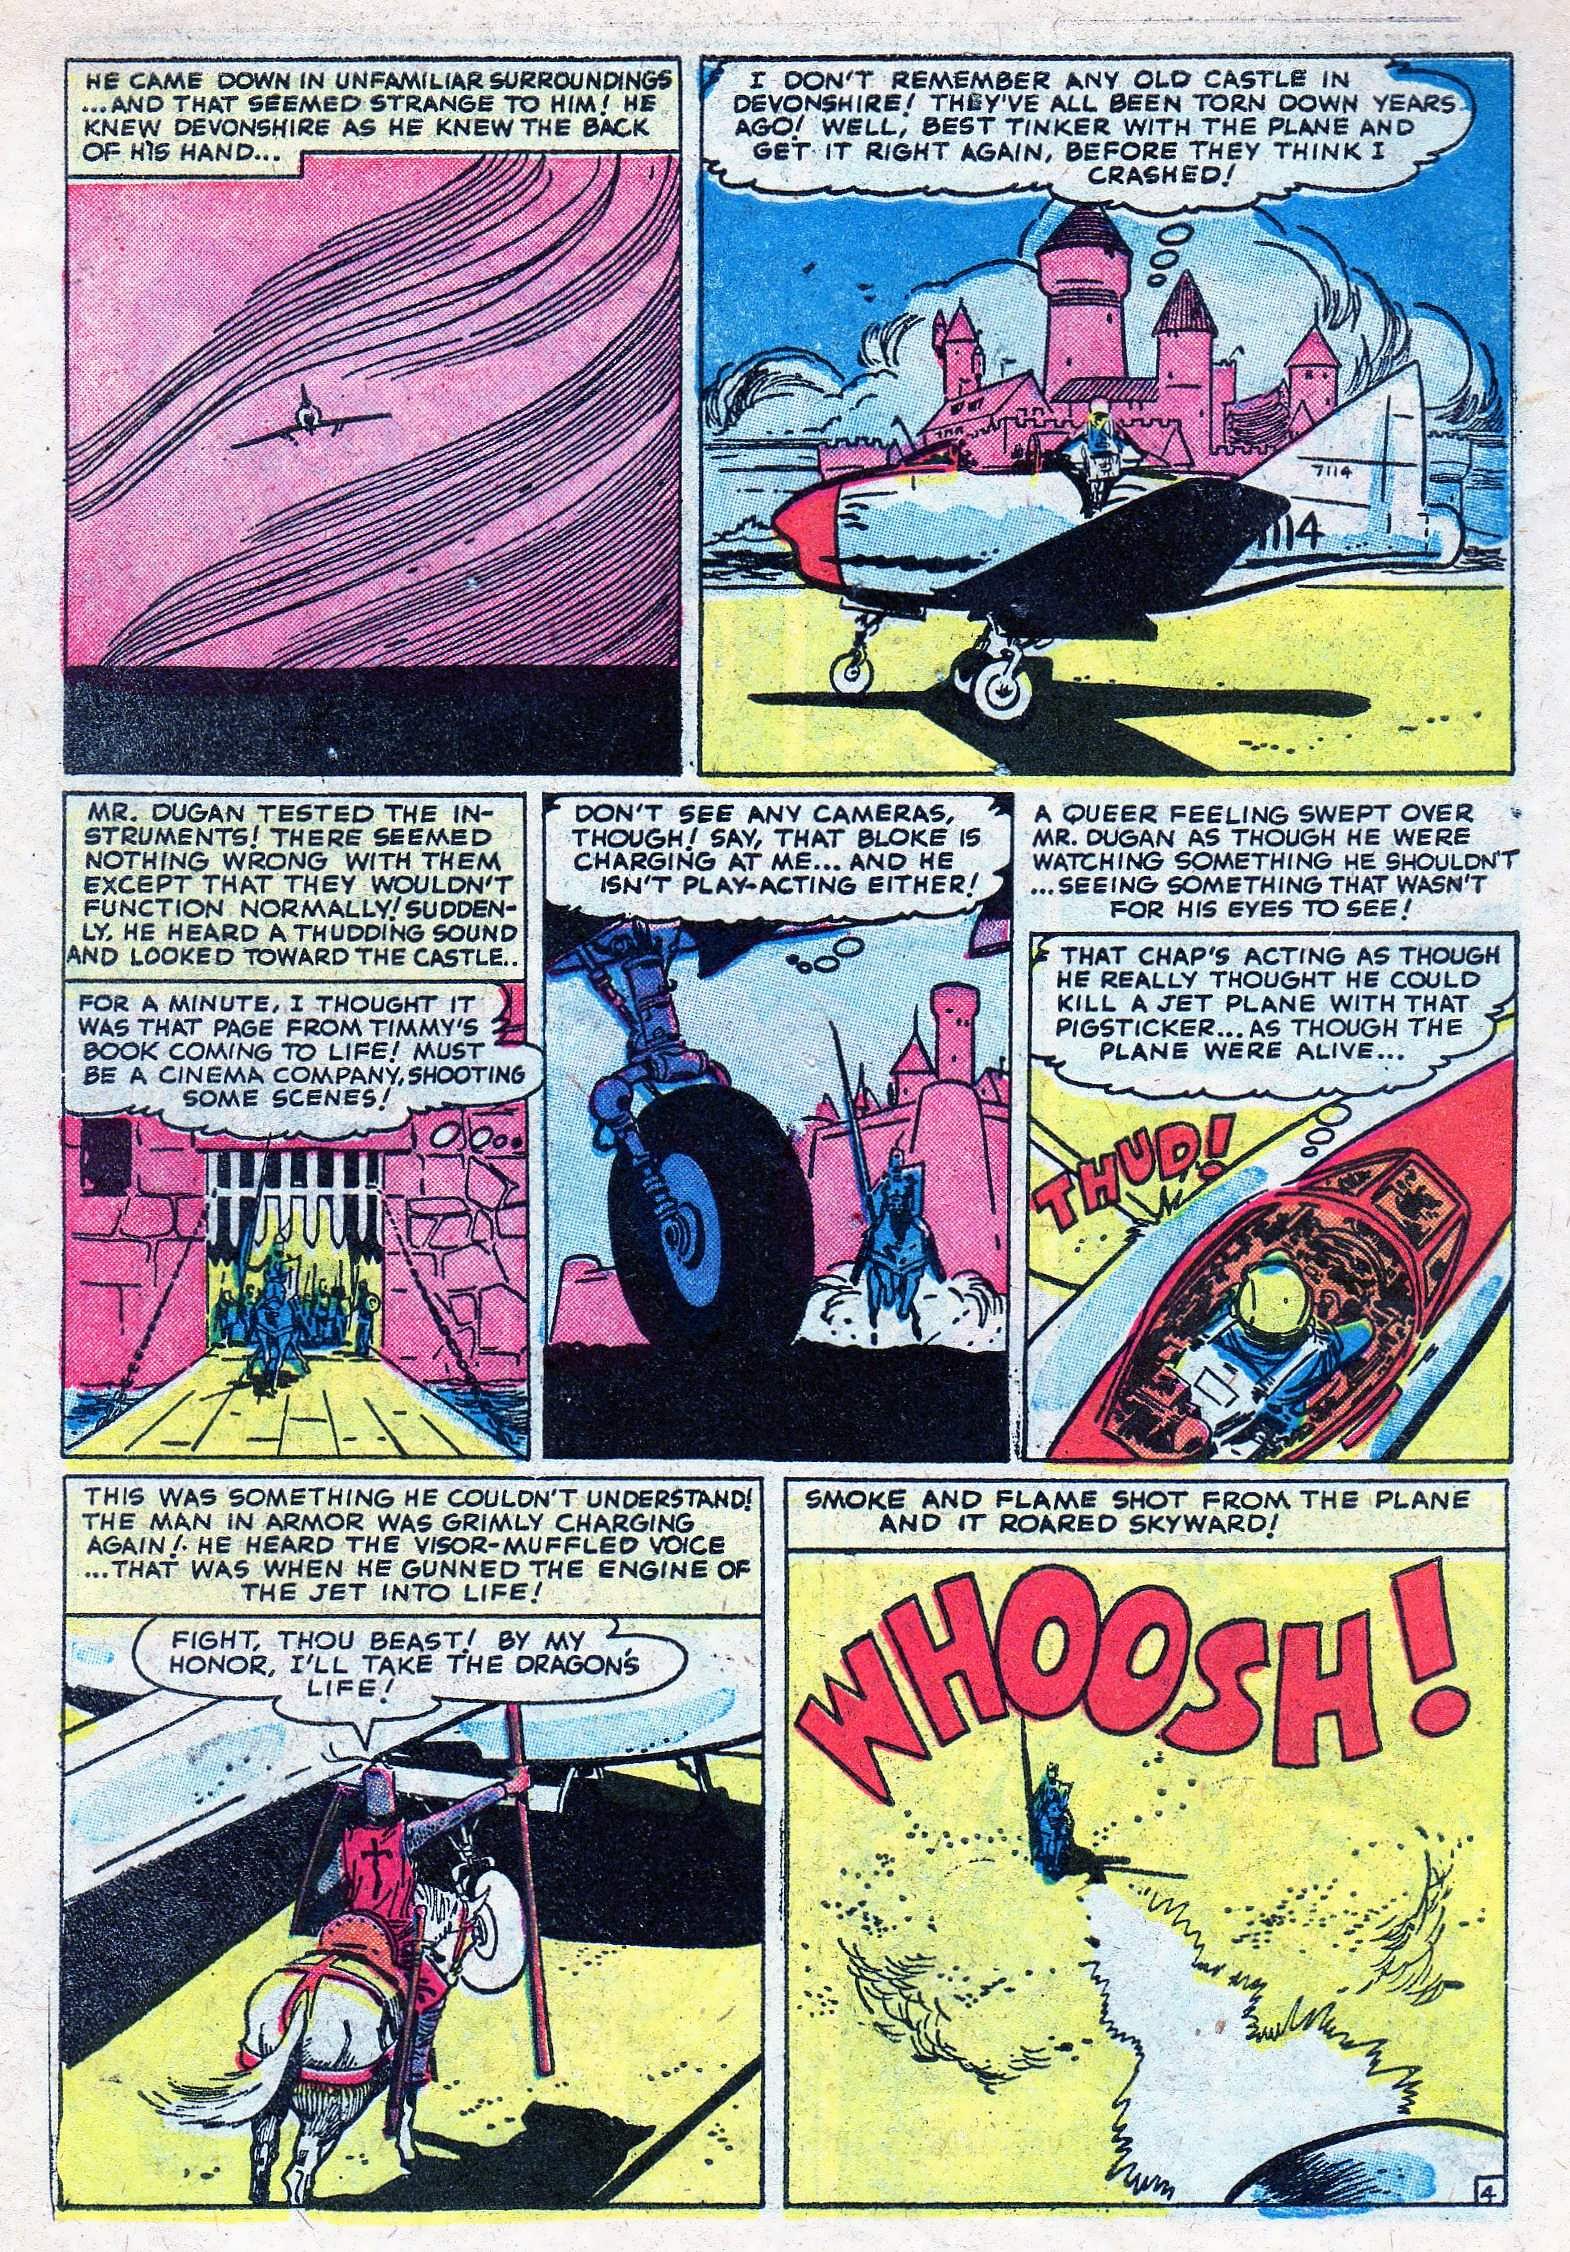 Marvel Tales (1949) 135 Page 5